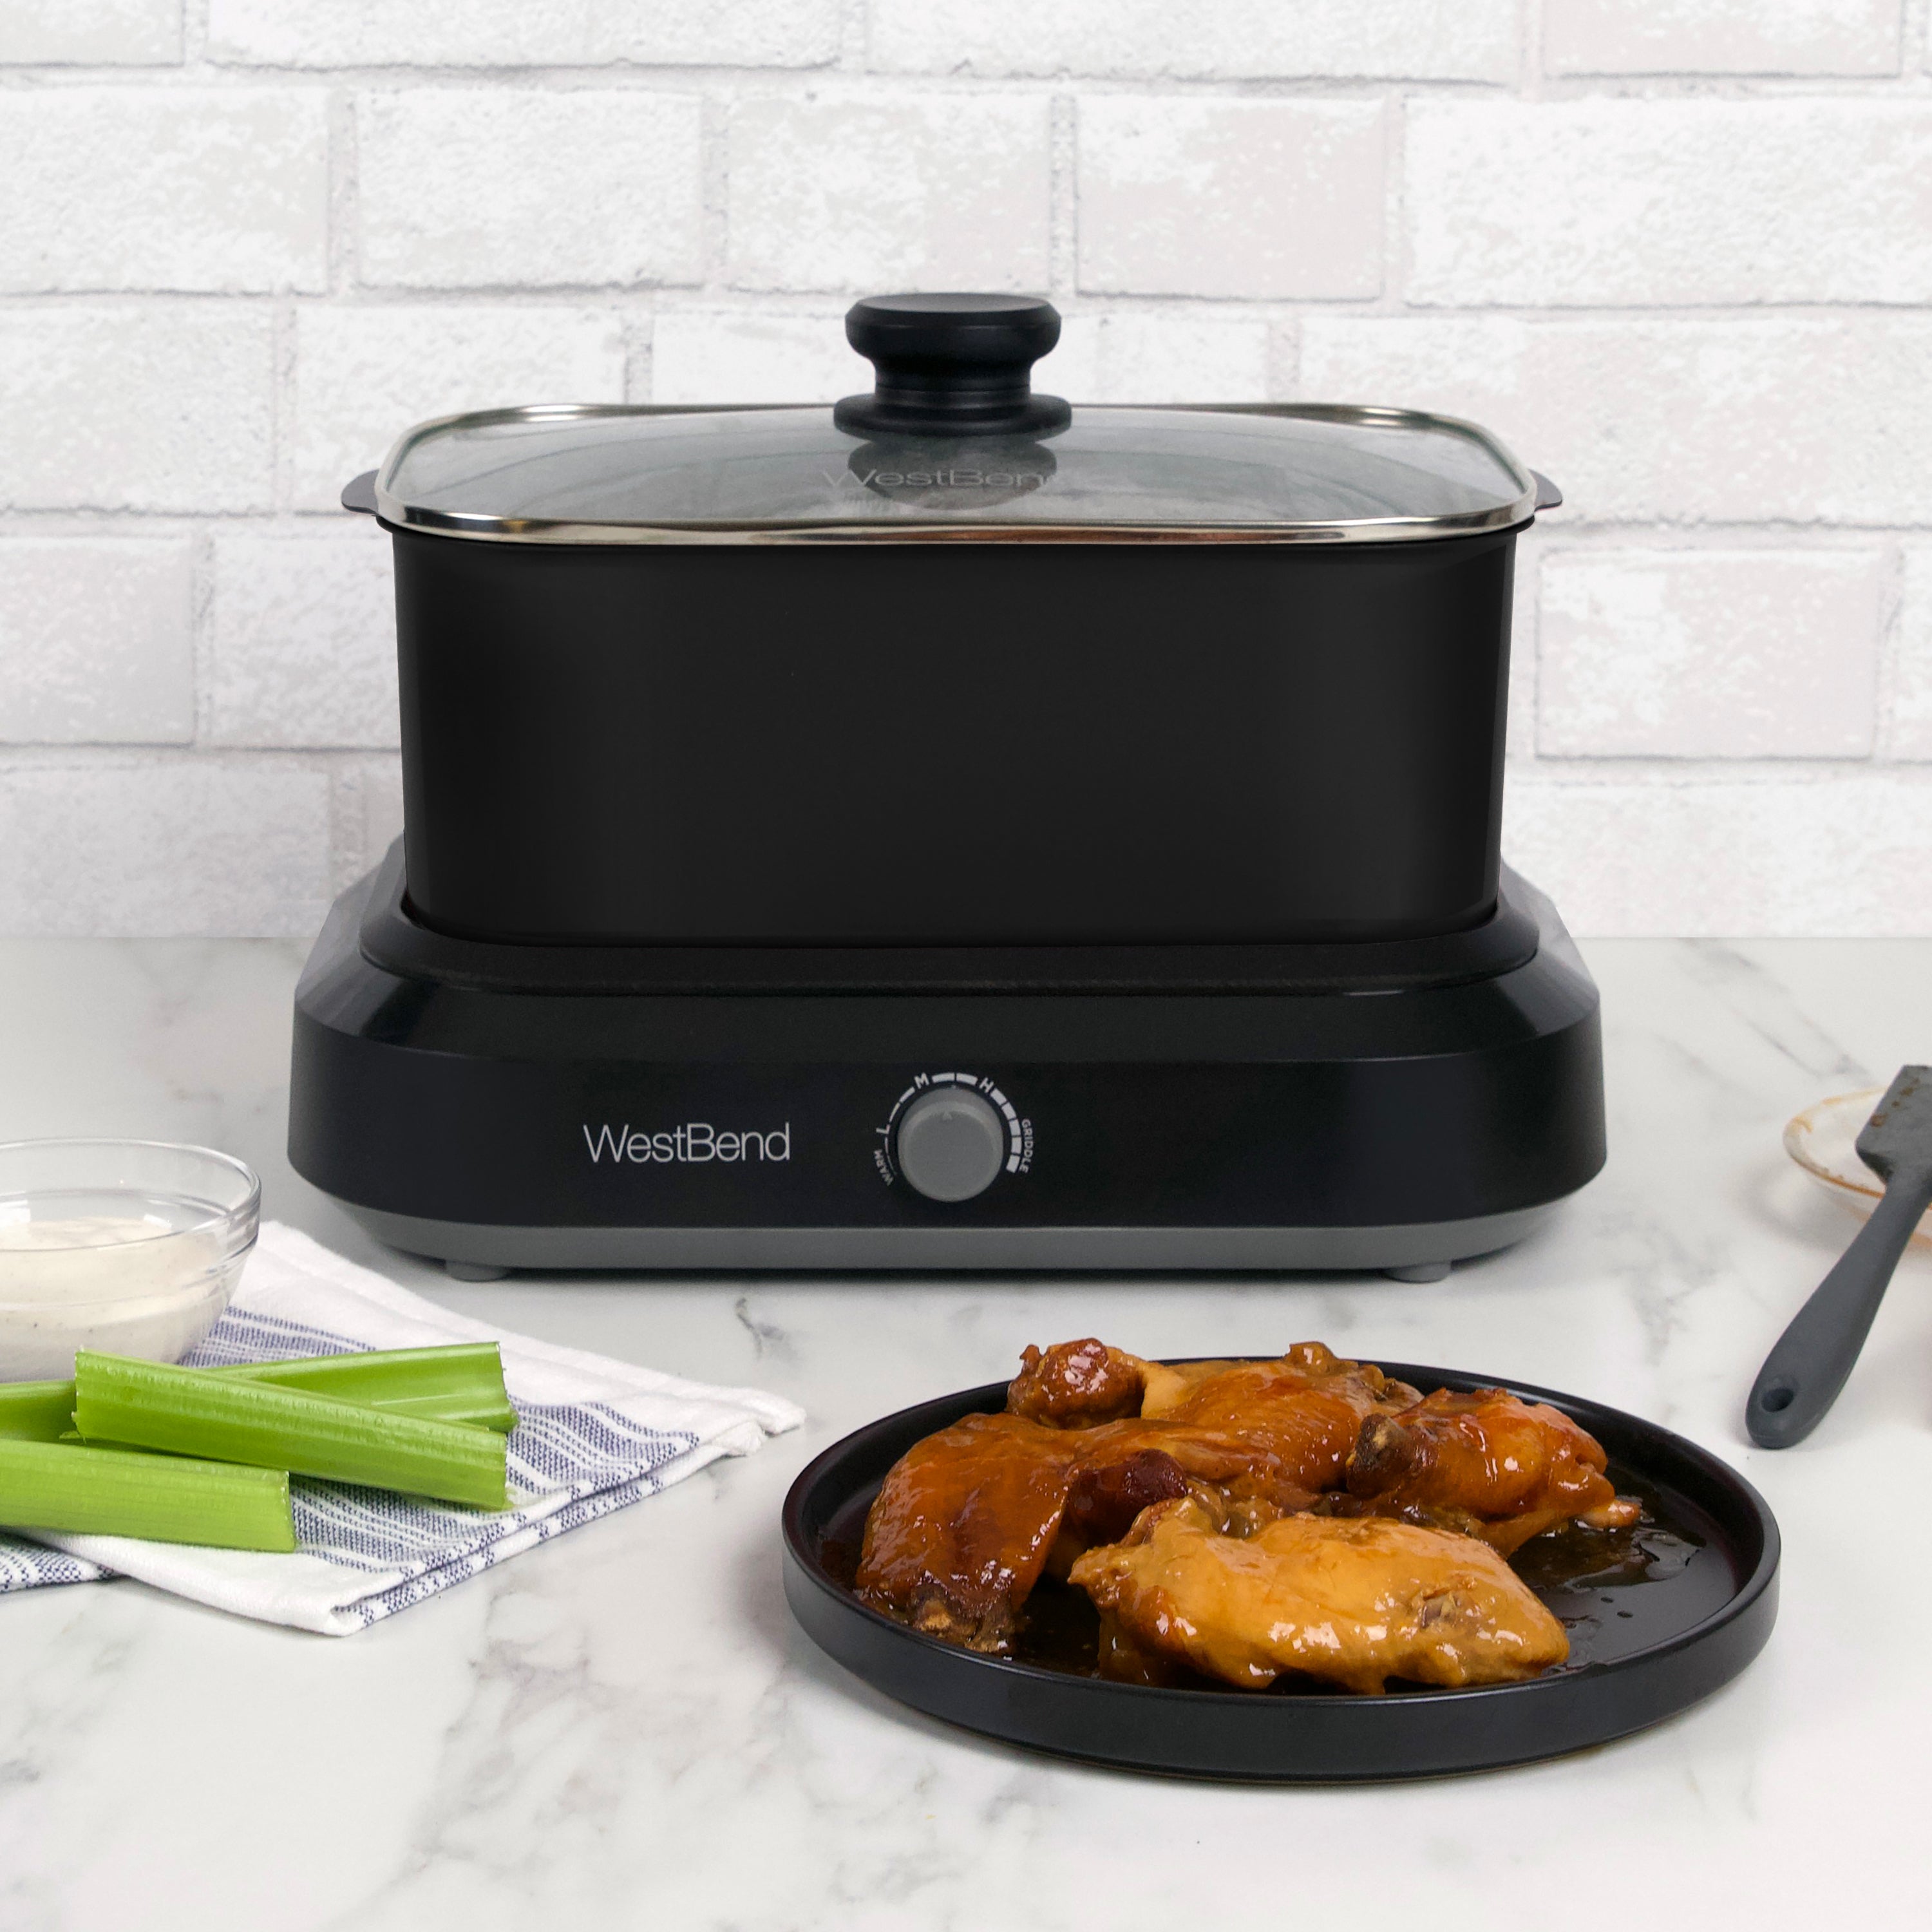 West Bend 87905 Slow Cooker Large Capacity Non-Stick Variable Temperature Control Includes Travel Lid and Thermal Carrying CA